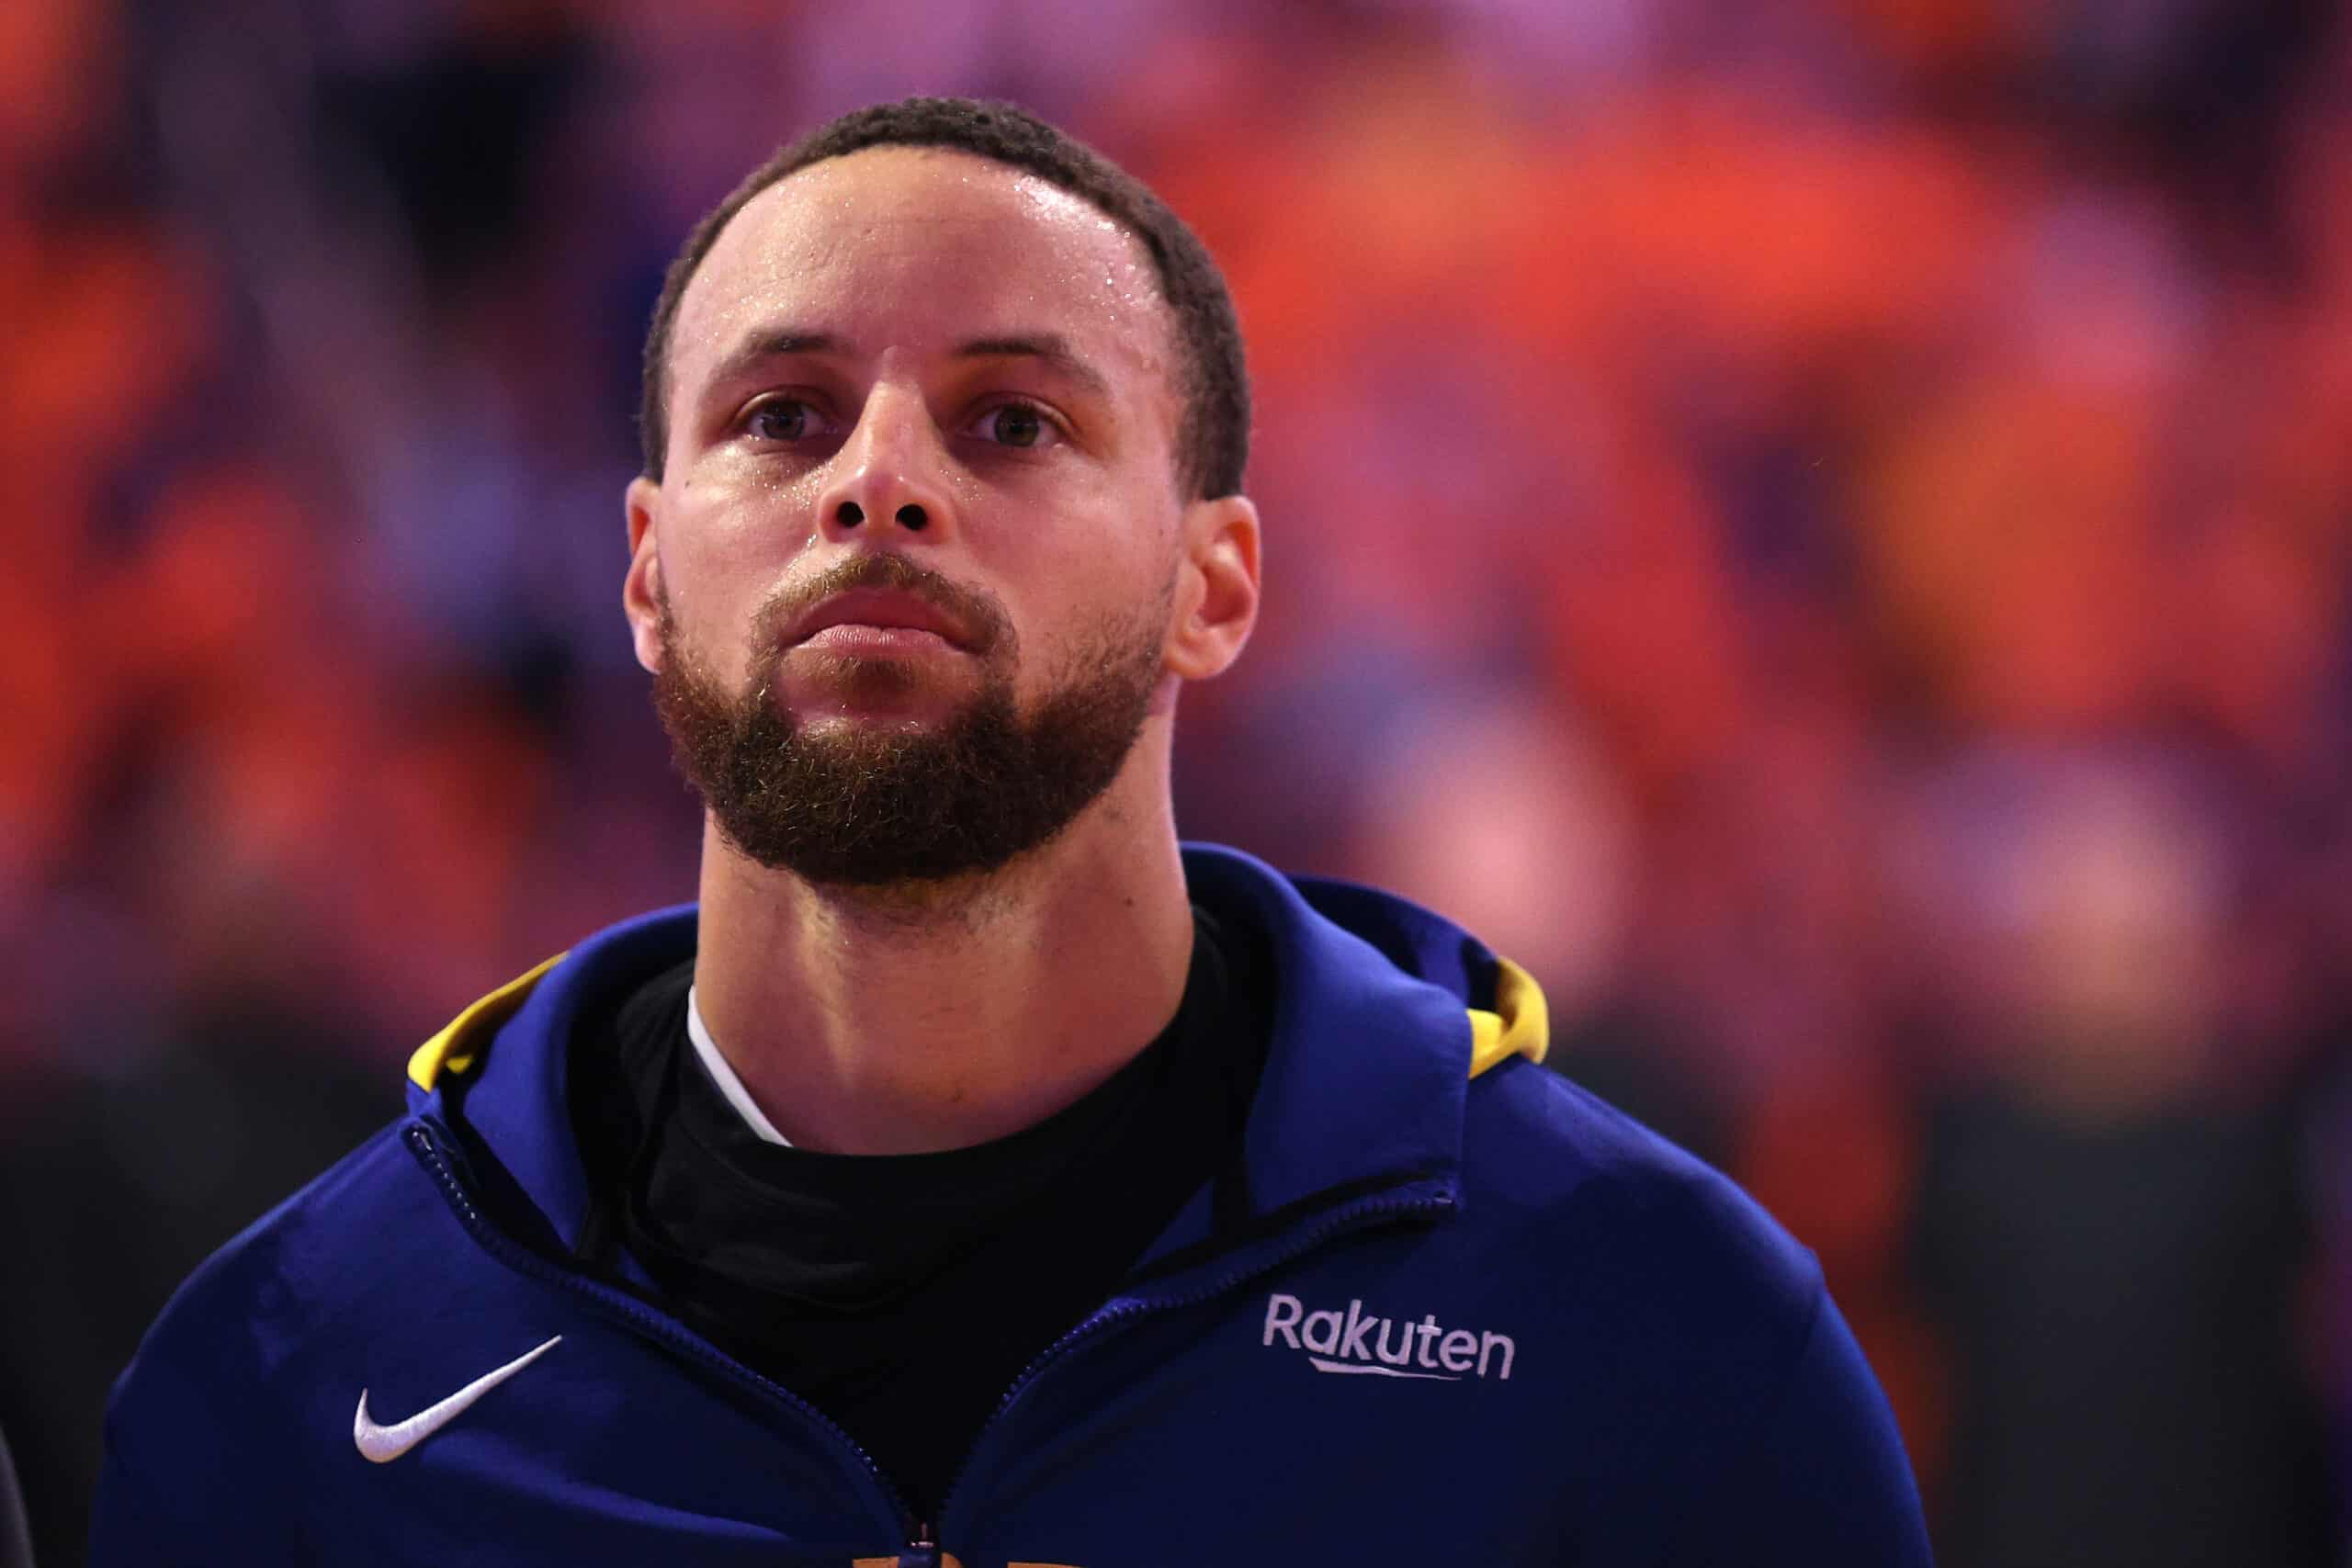 Stephen Curry Shares Injury Update On Social Media